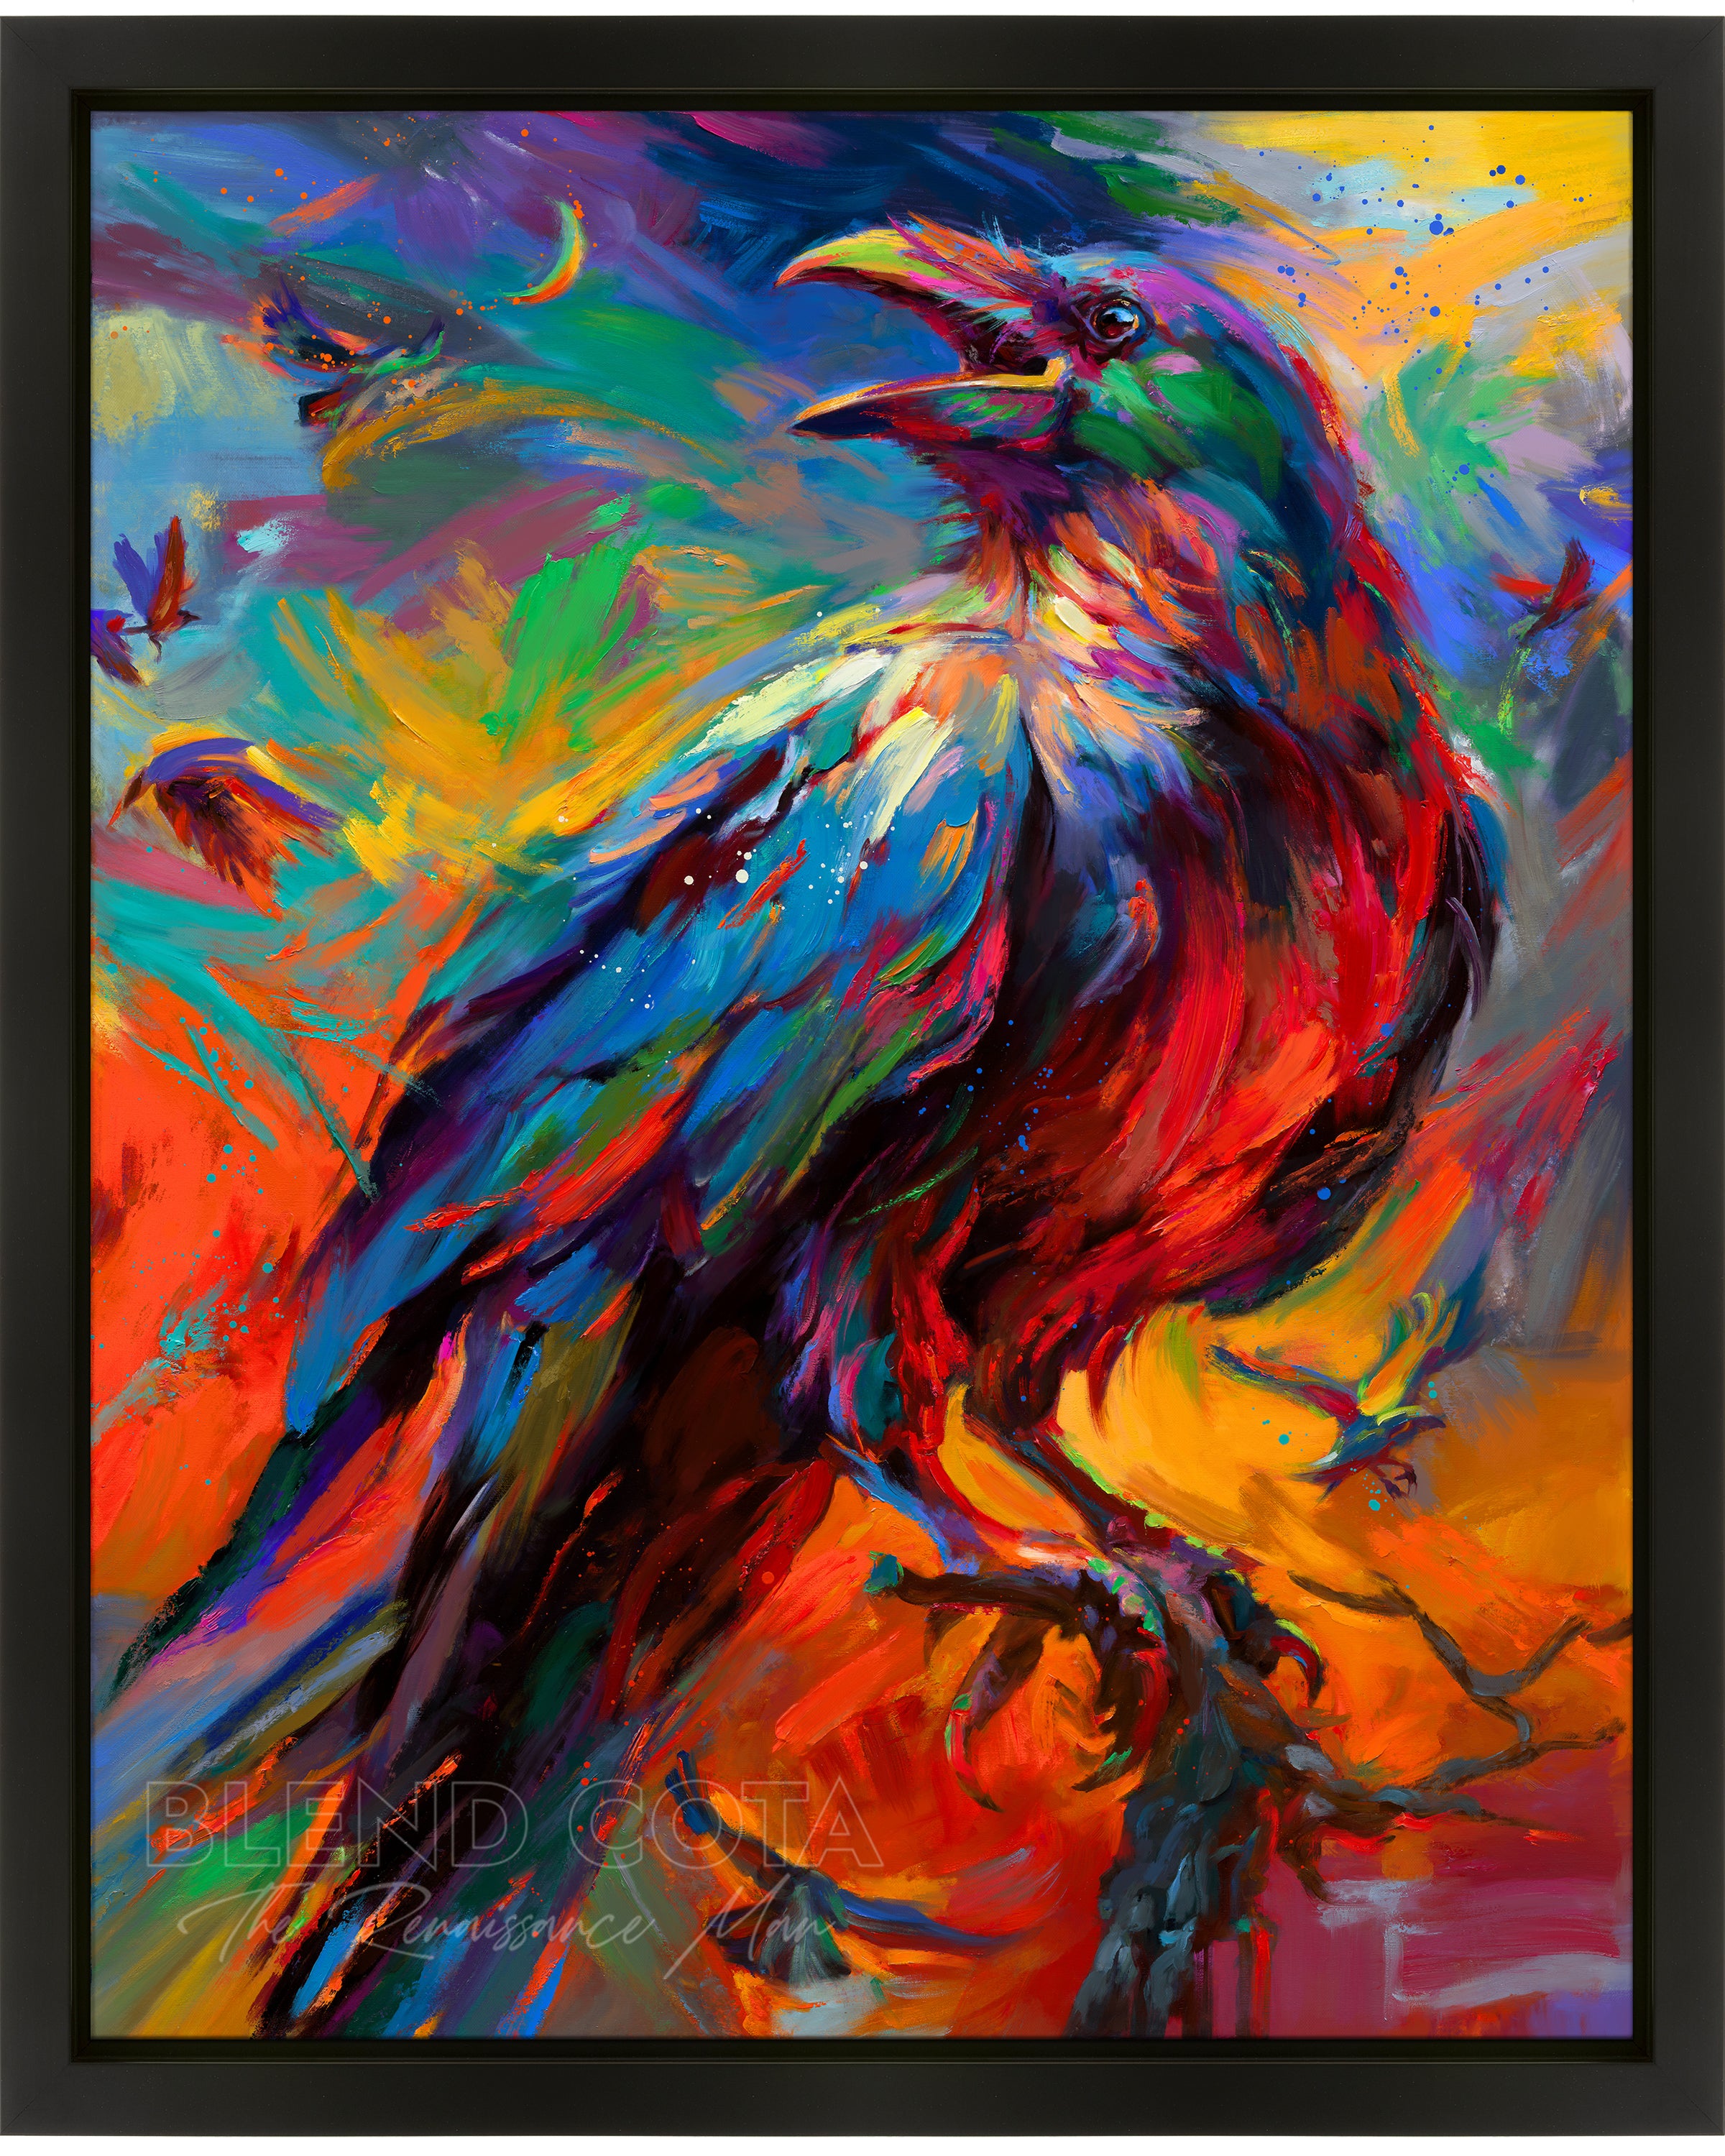 Oil on canvas painting of Raven, standing on a branch surrounded by a background of smaller birds in motion, treated with colorful brushstrokes. shown in a black frame